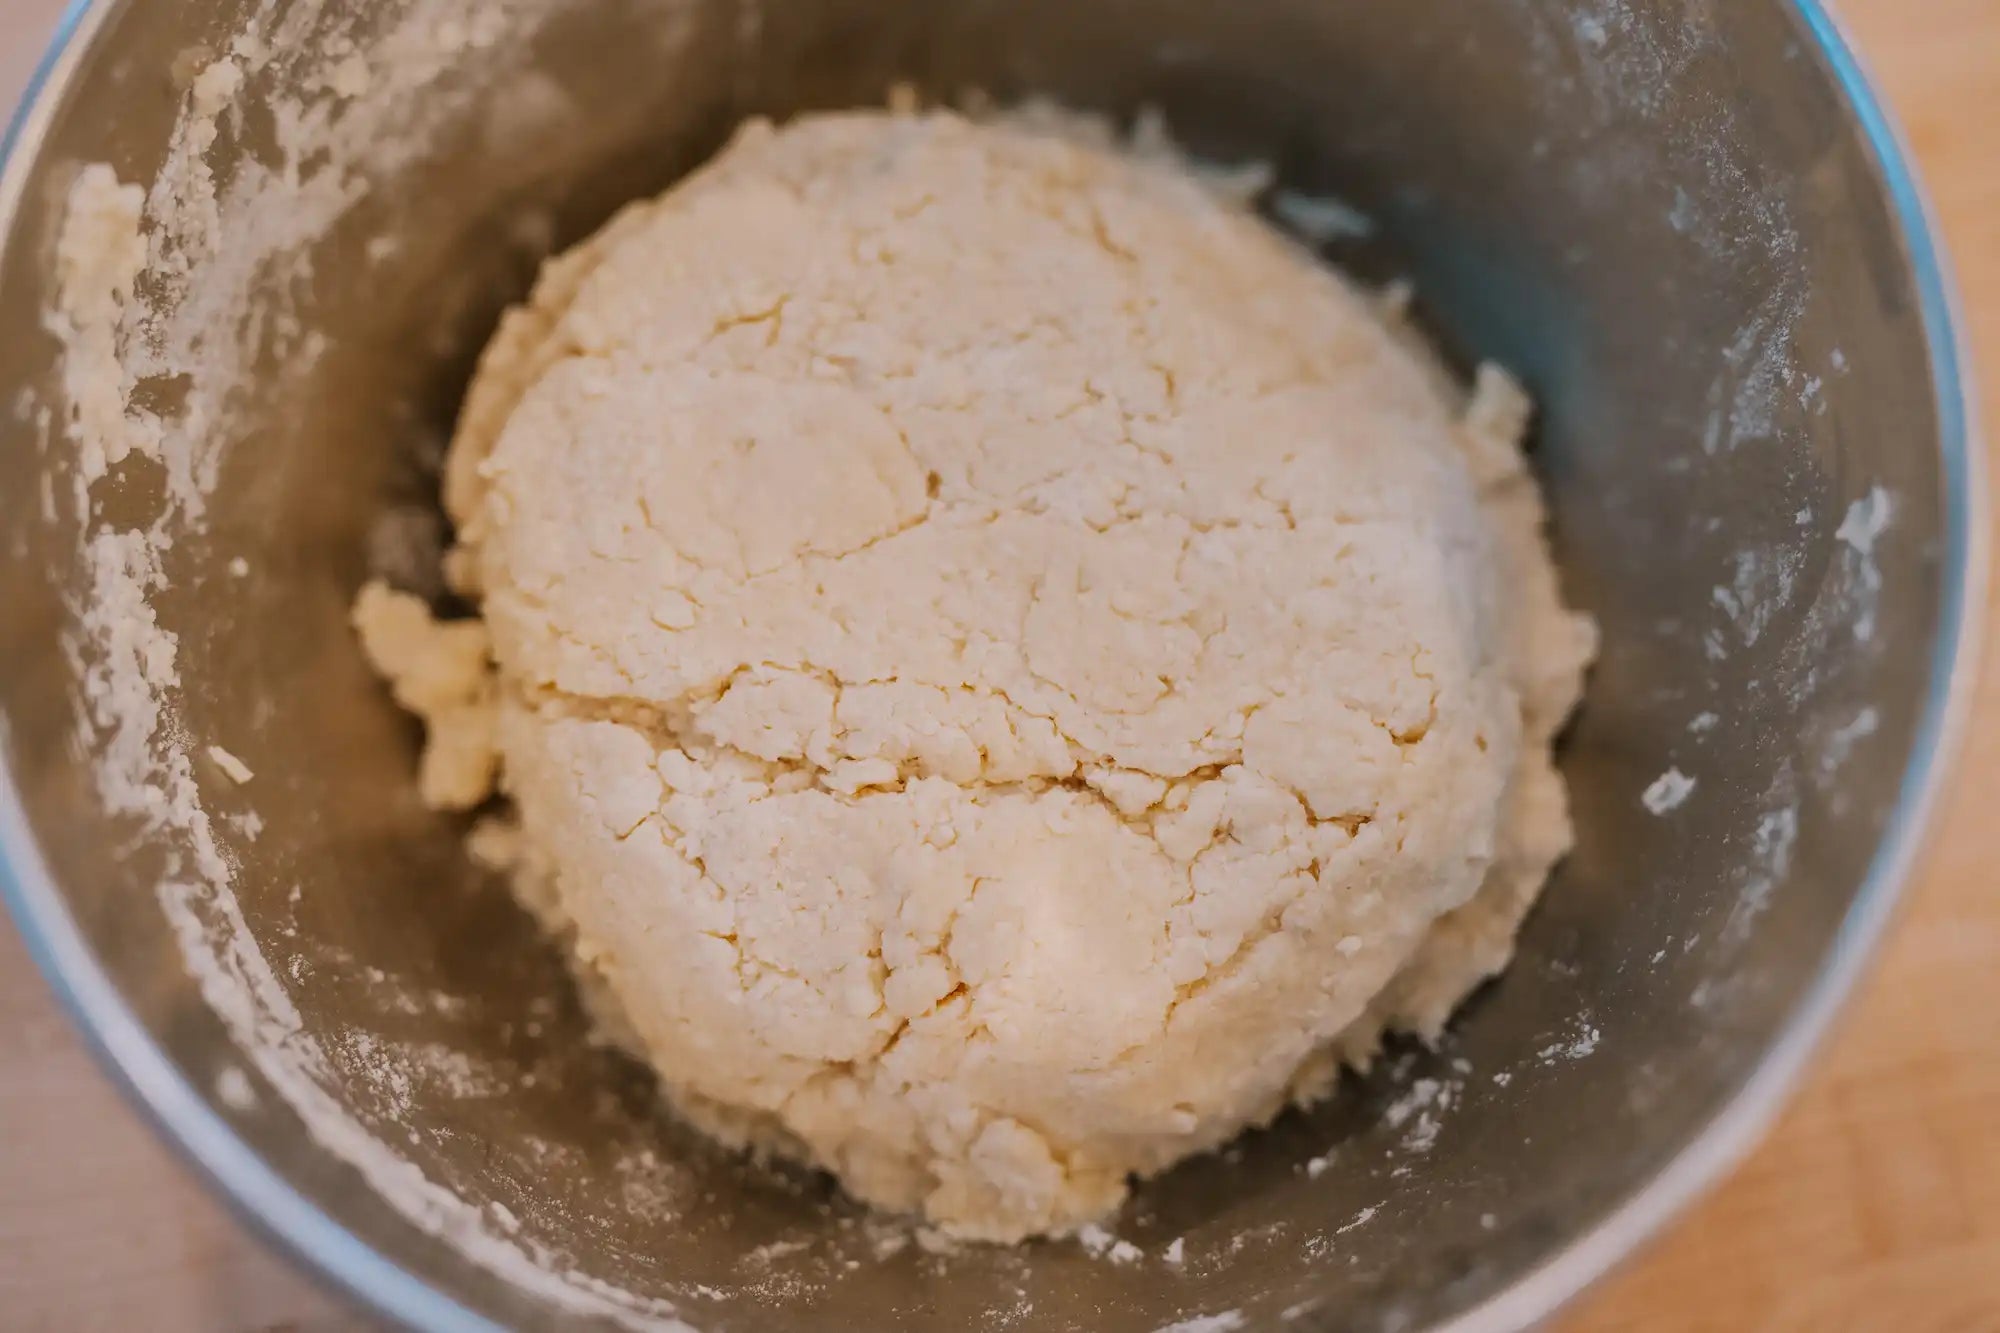 biscuit dough to rest in the refrigerator